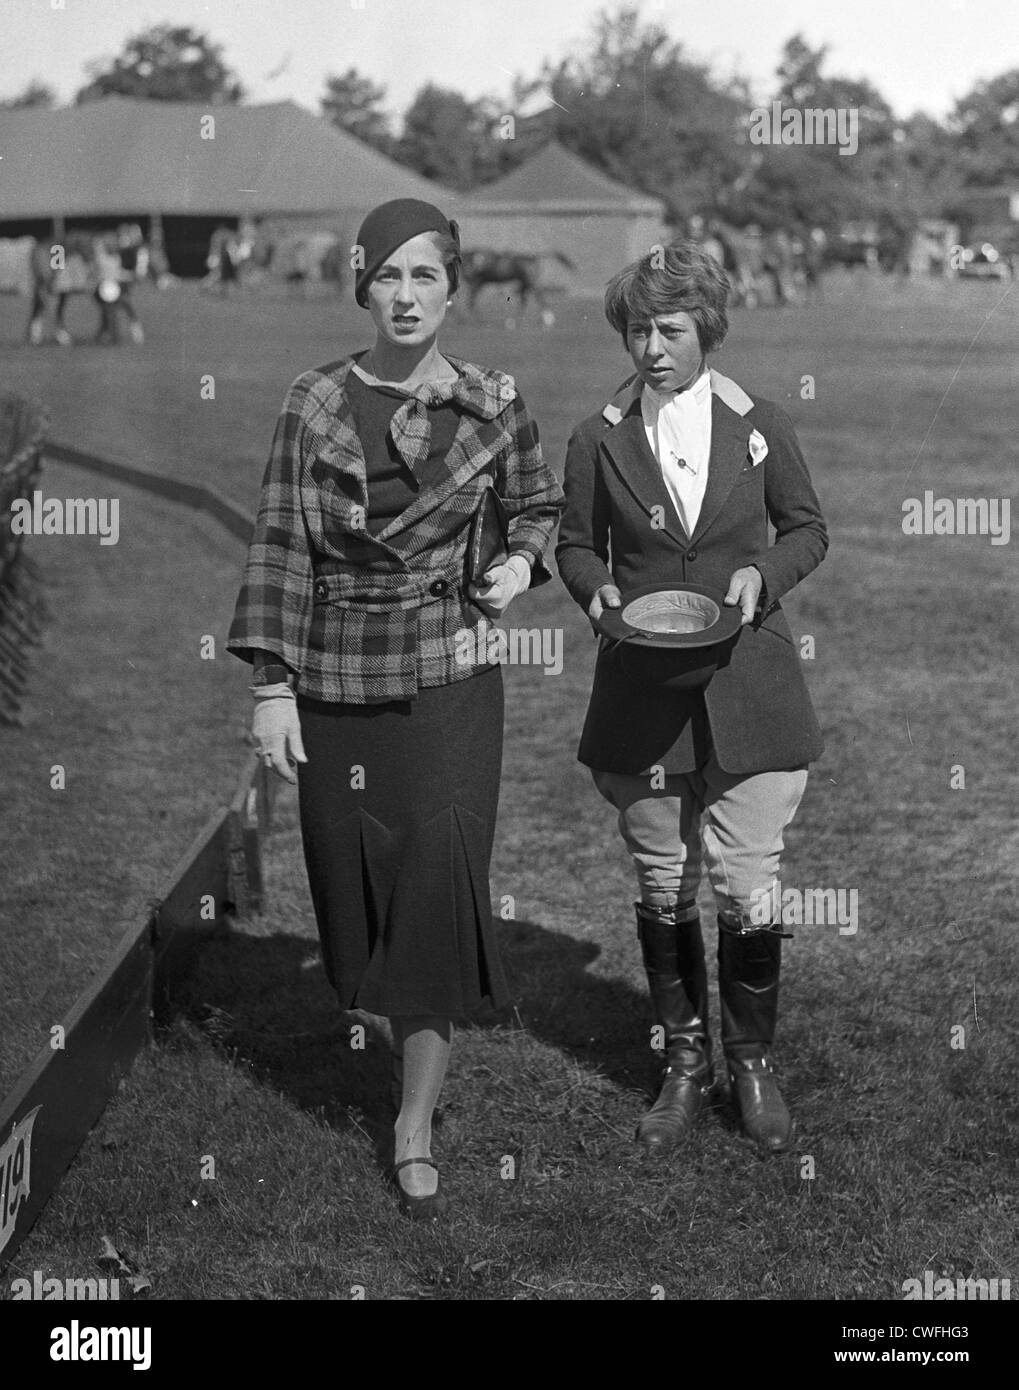 Mrs John V Bouvier III & Miss Jean D Olcott (daughter of Mrs Dudley Olcott) at the Piping Rock Horse Show, Long Island, NY, 1934 Stock Photo